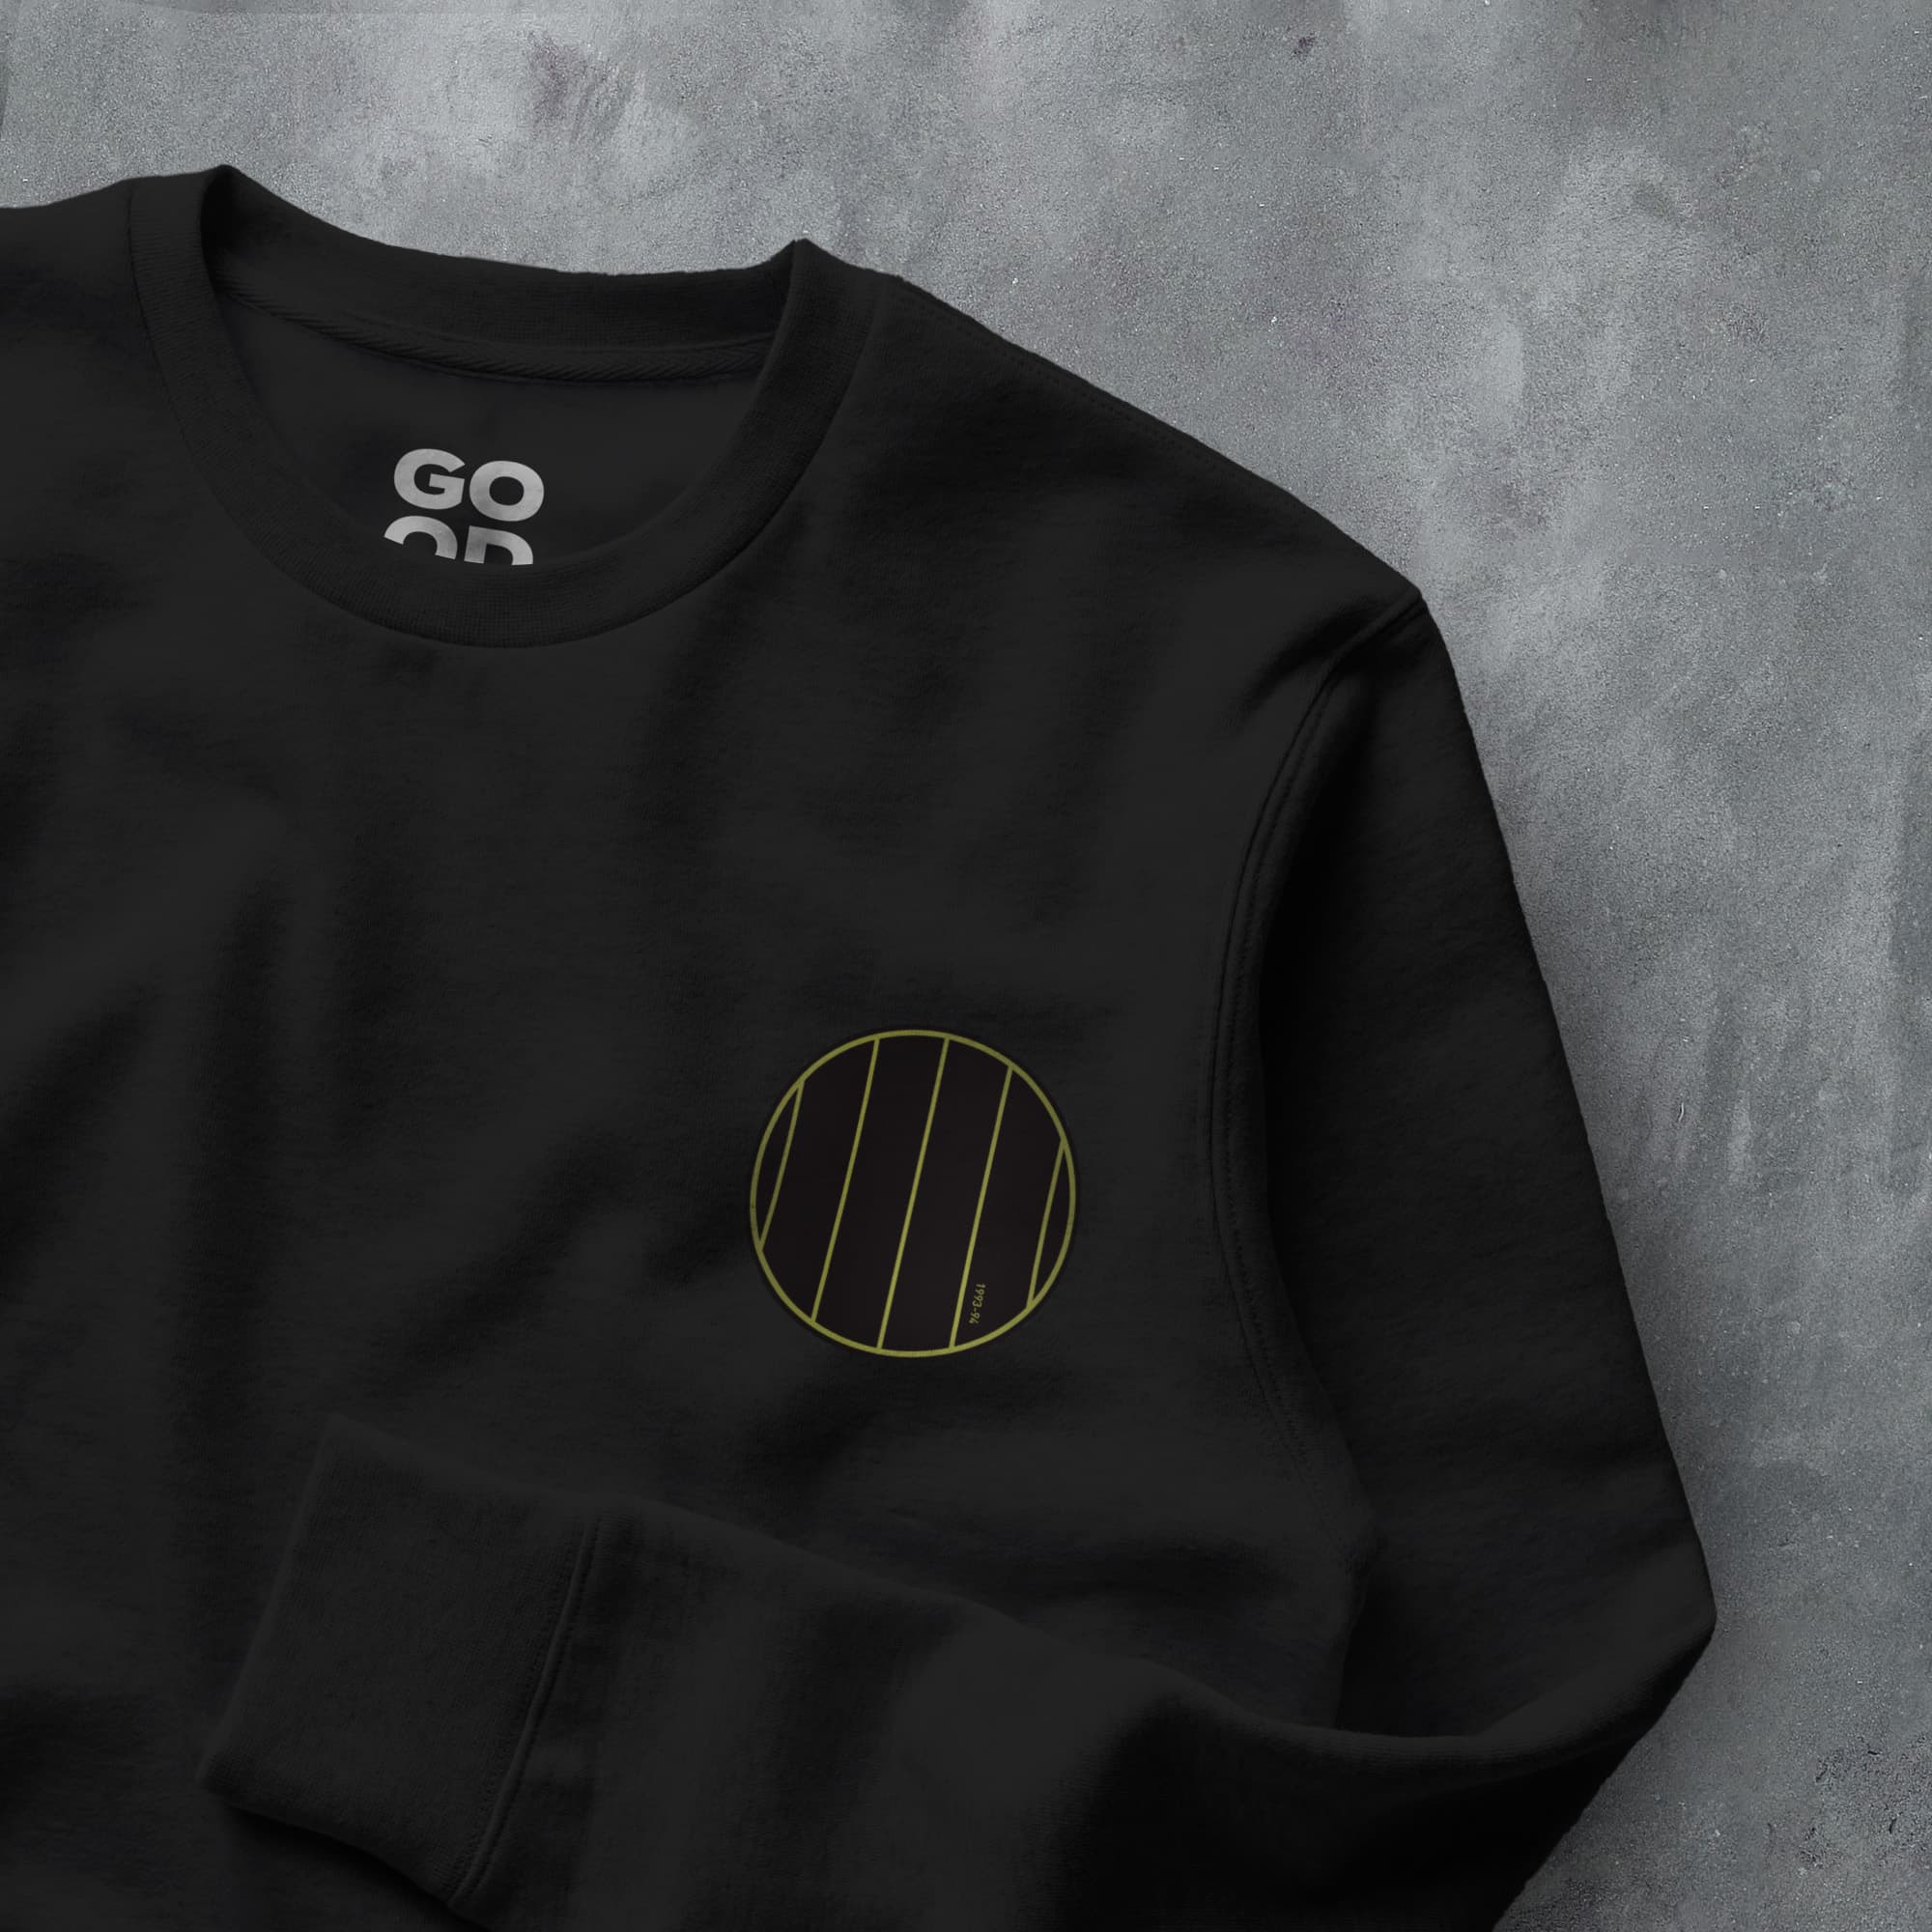 a black sweatshirt with the word go on it